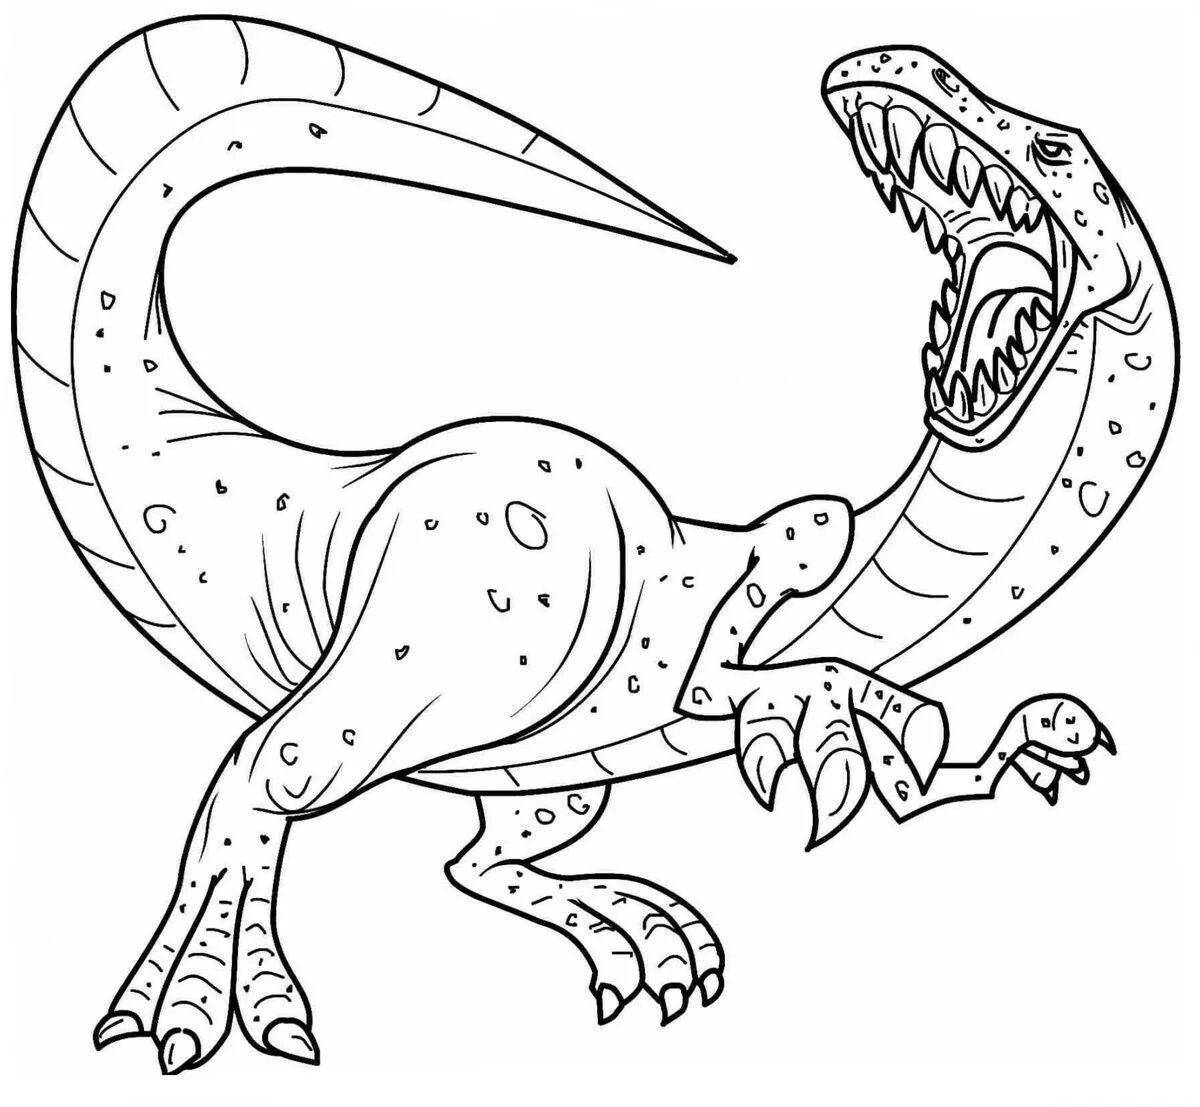 Colorful dinosaurs coloring book for 7-8 year olds